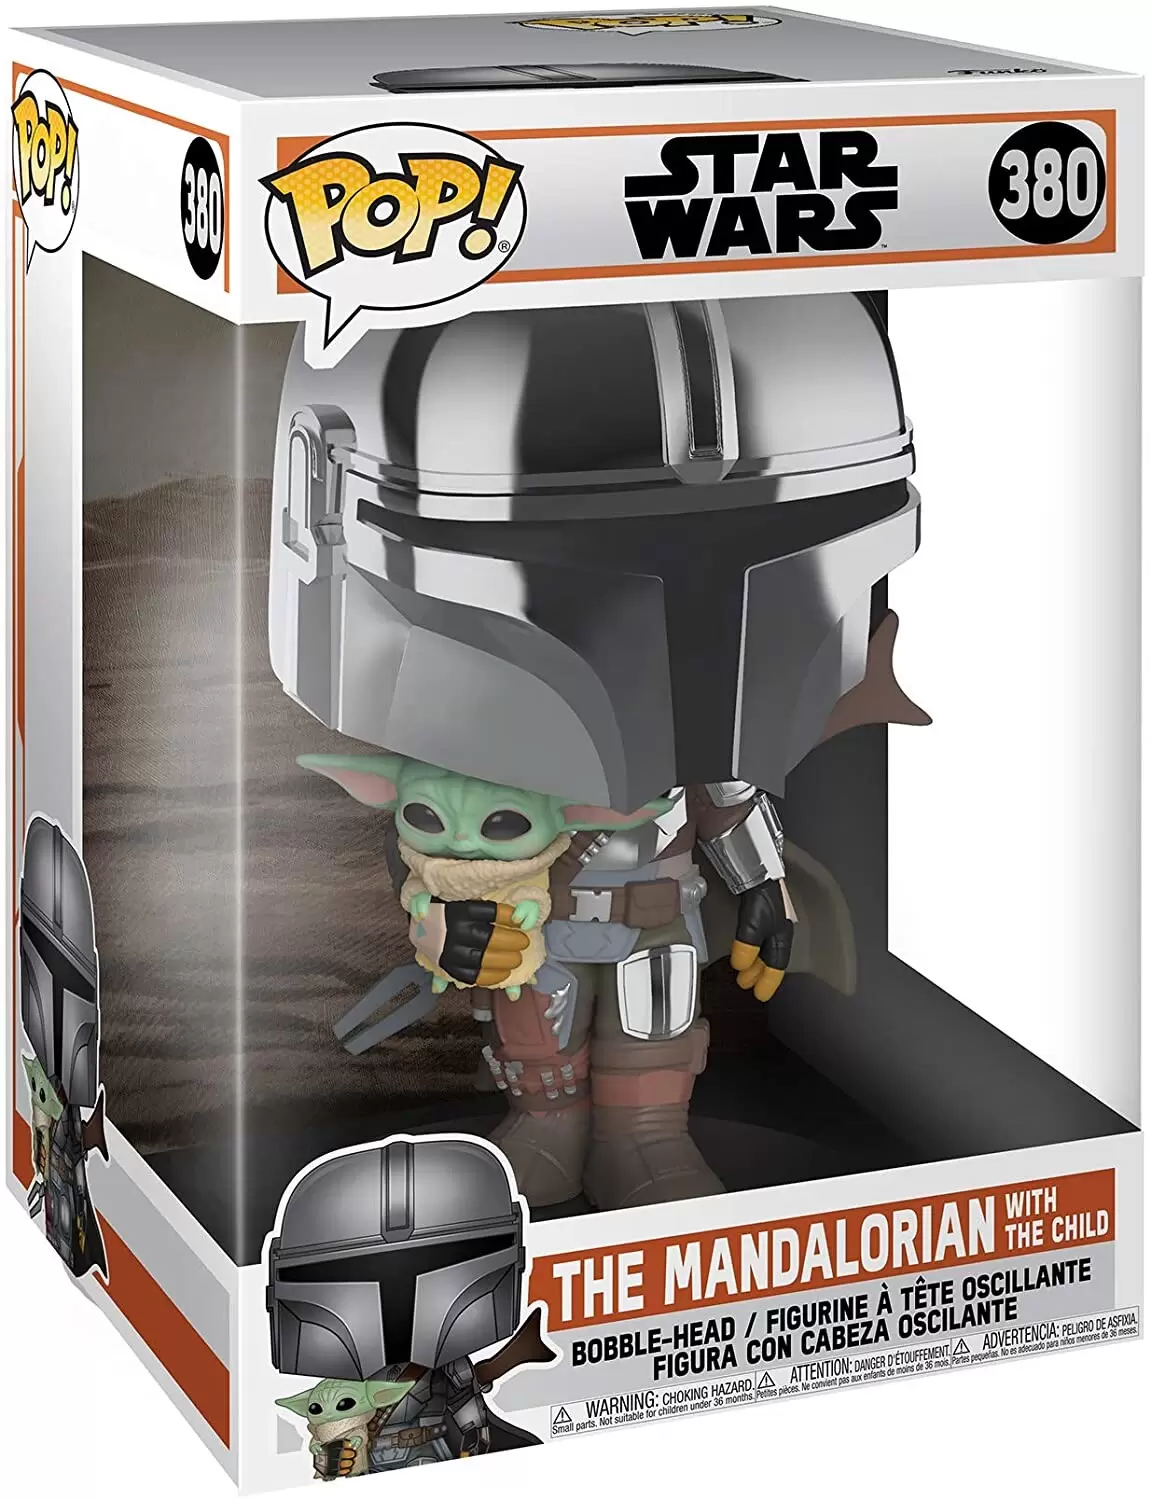 POP! Star Wars - The Mandalorian with the Child